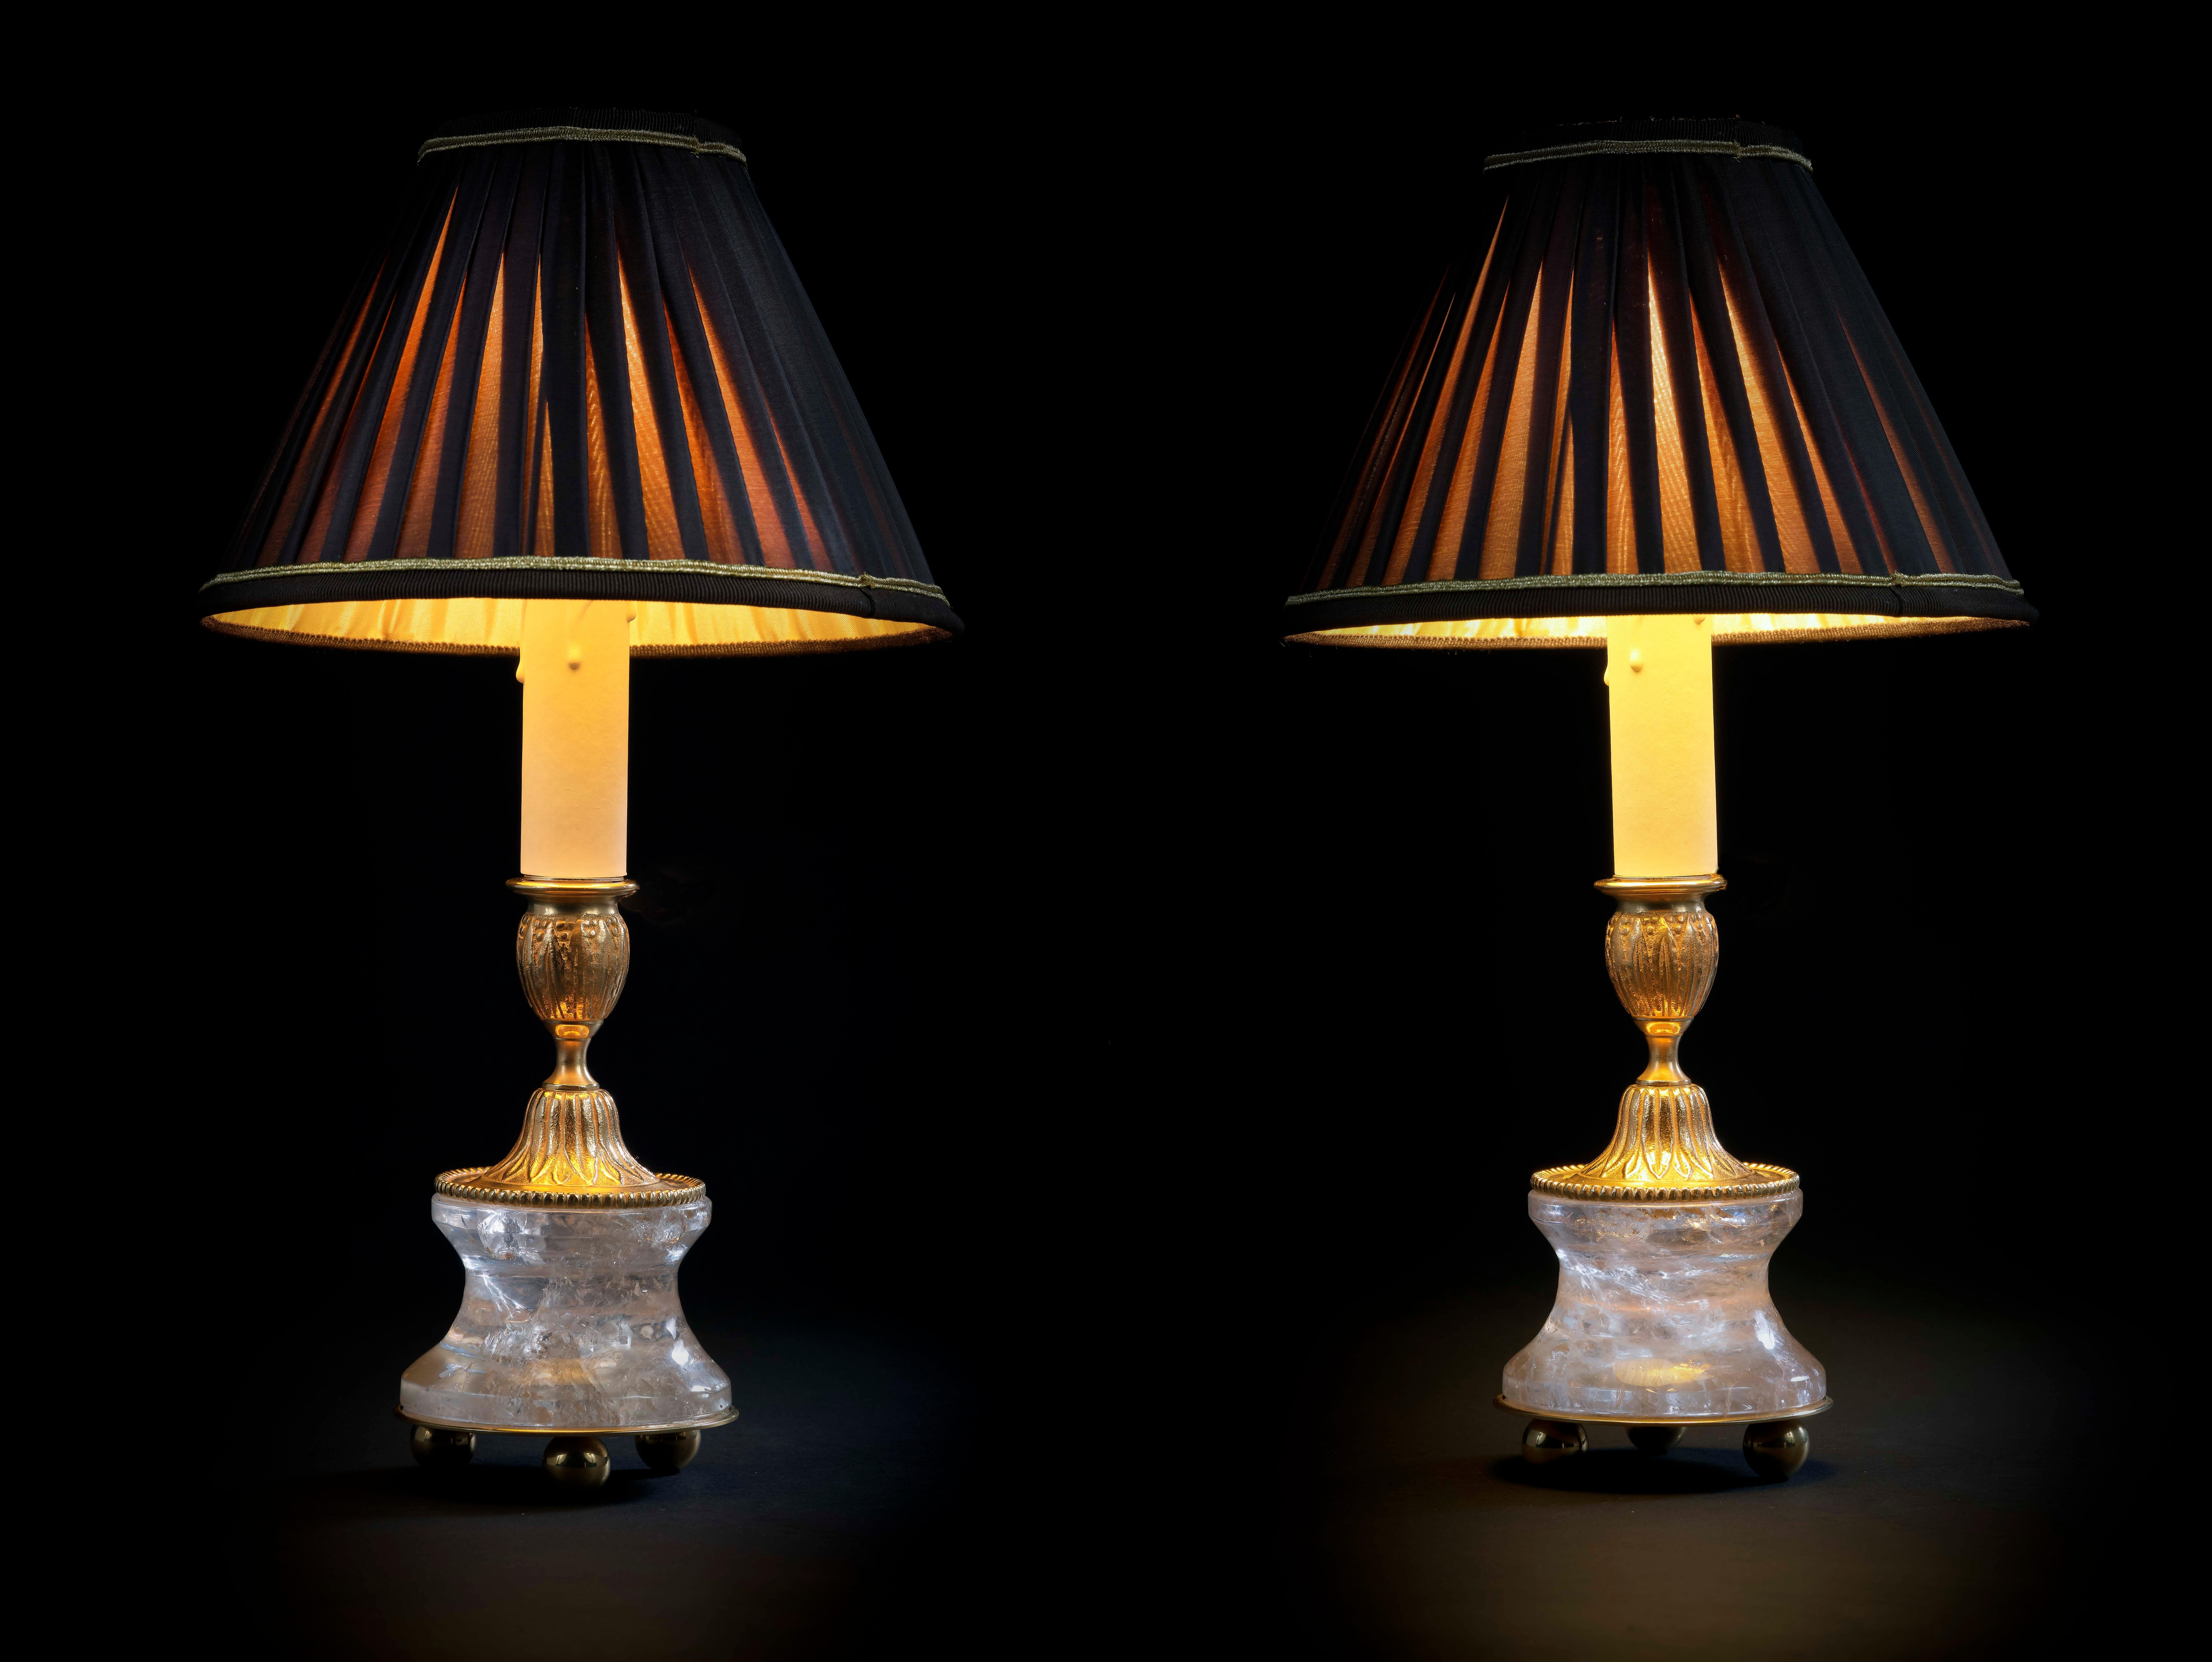 Rock crystal Louis the XVI th style 24-karat ormolu gilding bronze chocolate brown shades made by Alexandre Vossion.
This model can be also used as candlesticks to make your dining table so chic.
Others colors for the lampshades are also available